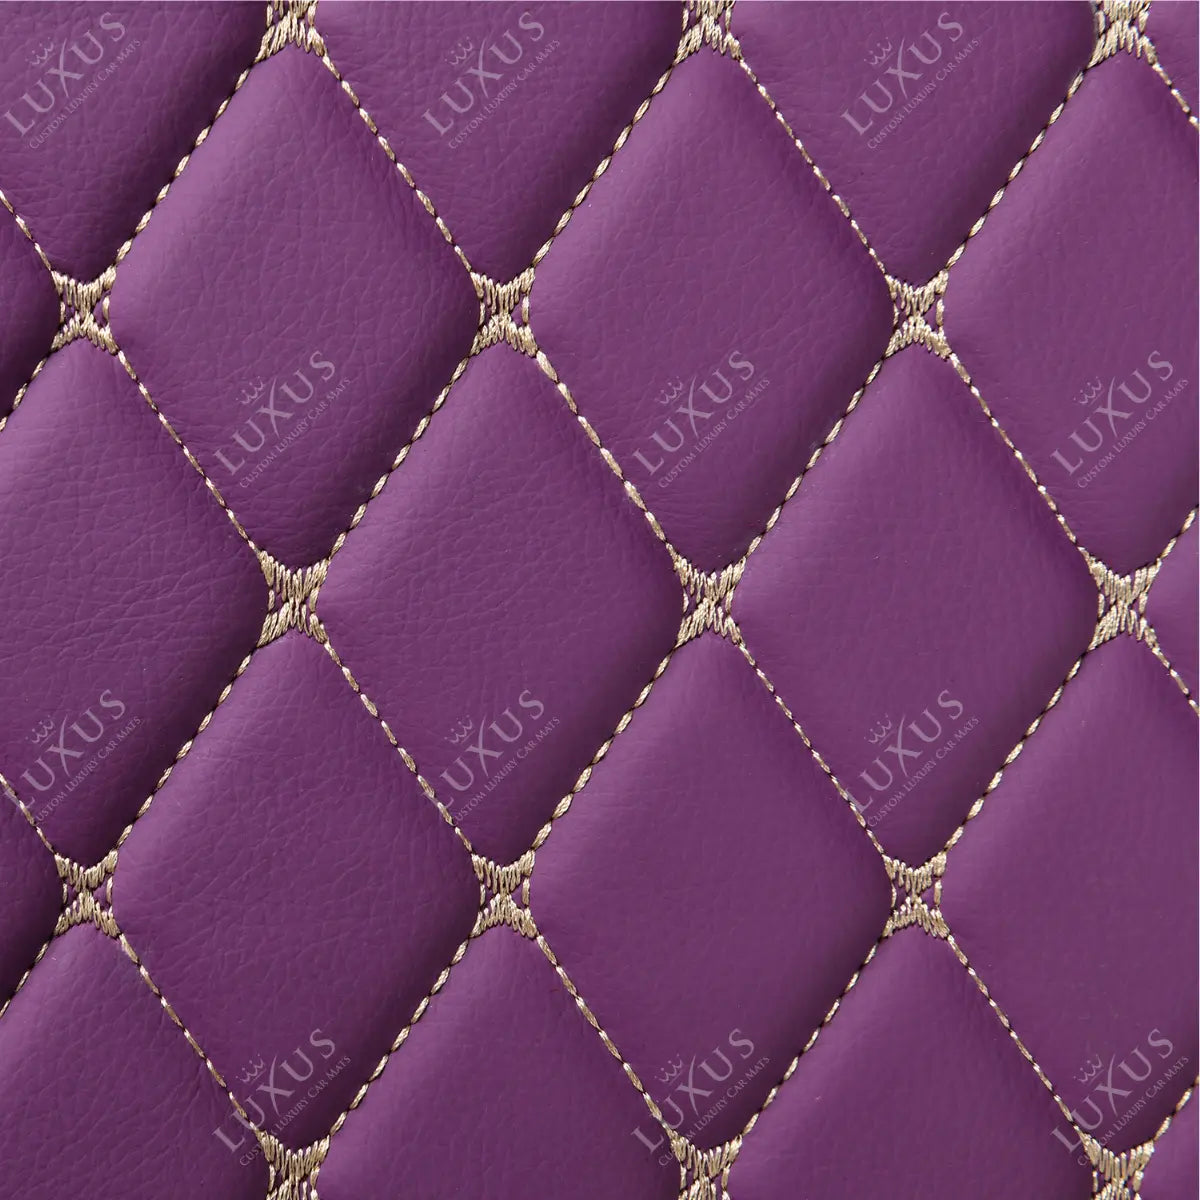 Trunk Mats For Car, Truck & SUV Luxus Car Mats Custom All-Weather  Waterproof Diamond Auto Boot Liner Carpets Rugs Purple